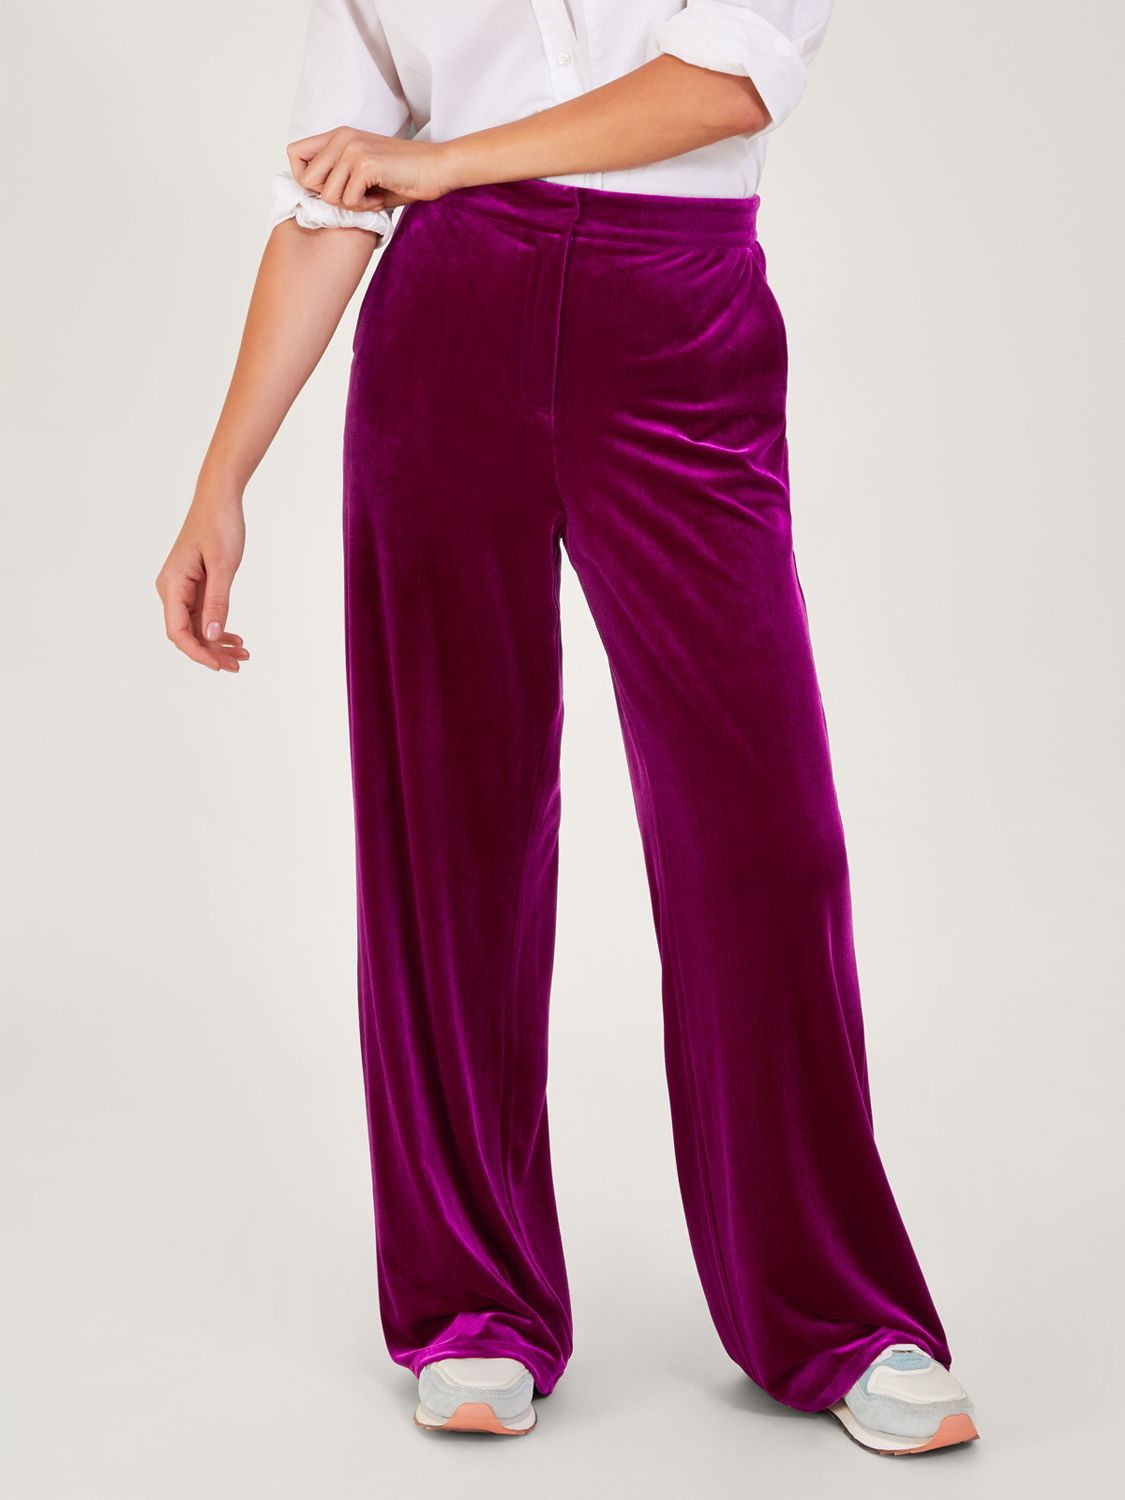 Wine And Pink Heavy Velvet Pant/Palazzo Style Suit